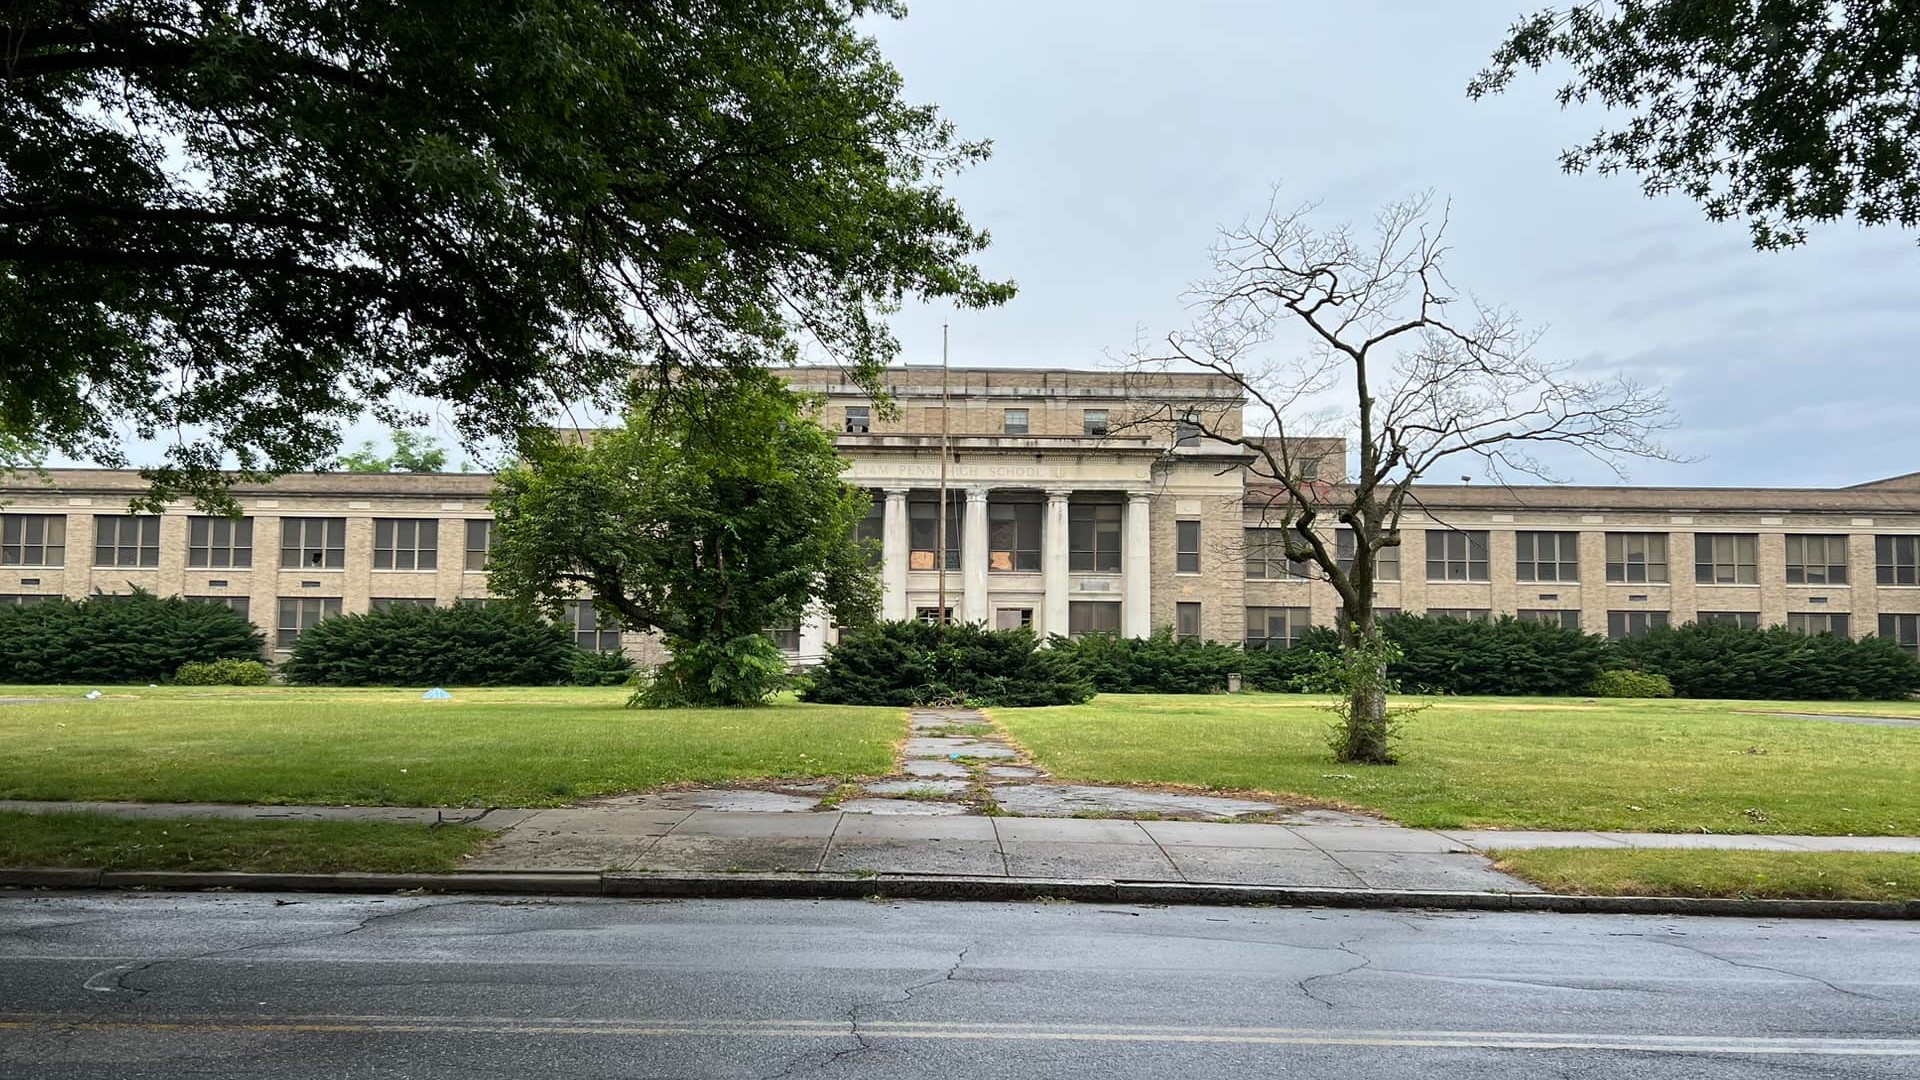 Another meeting for the former William Penn High School in Harrisburg is scheduled for today.